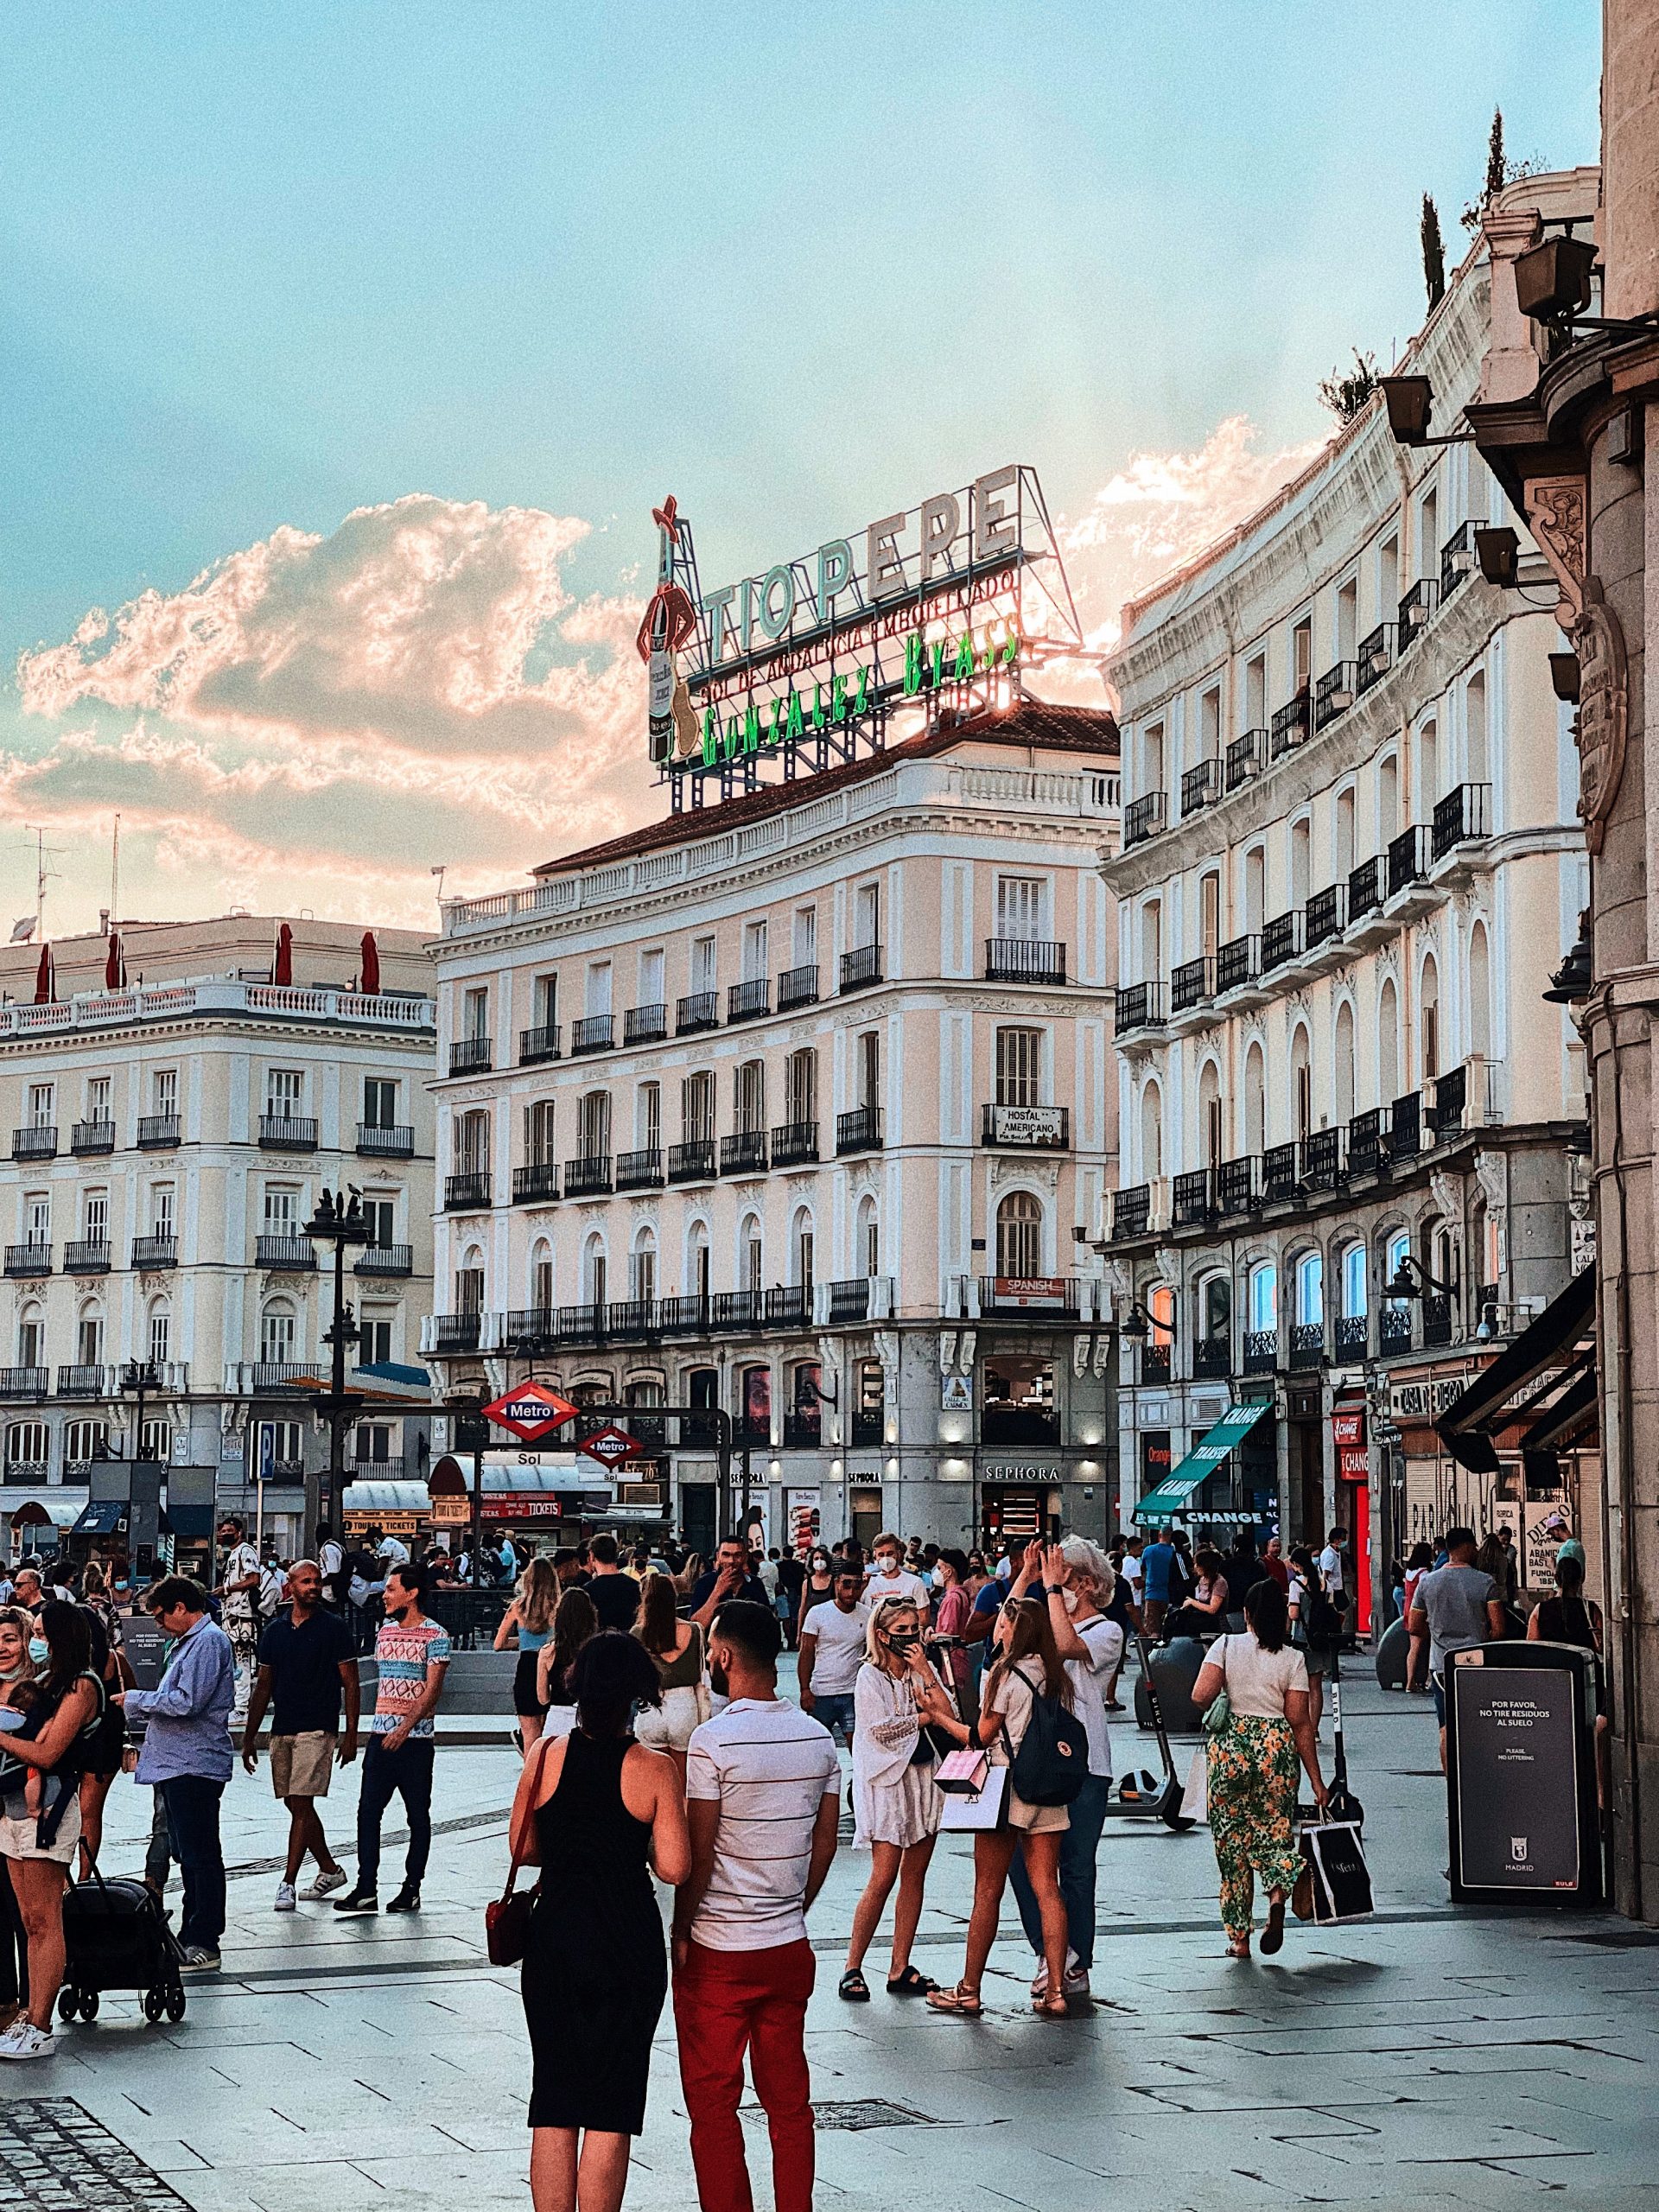 Spend 2 days in madrid visiting Madrid alone Self guided walking tour madrid sol